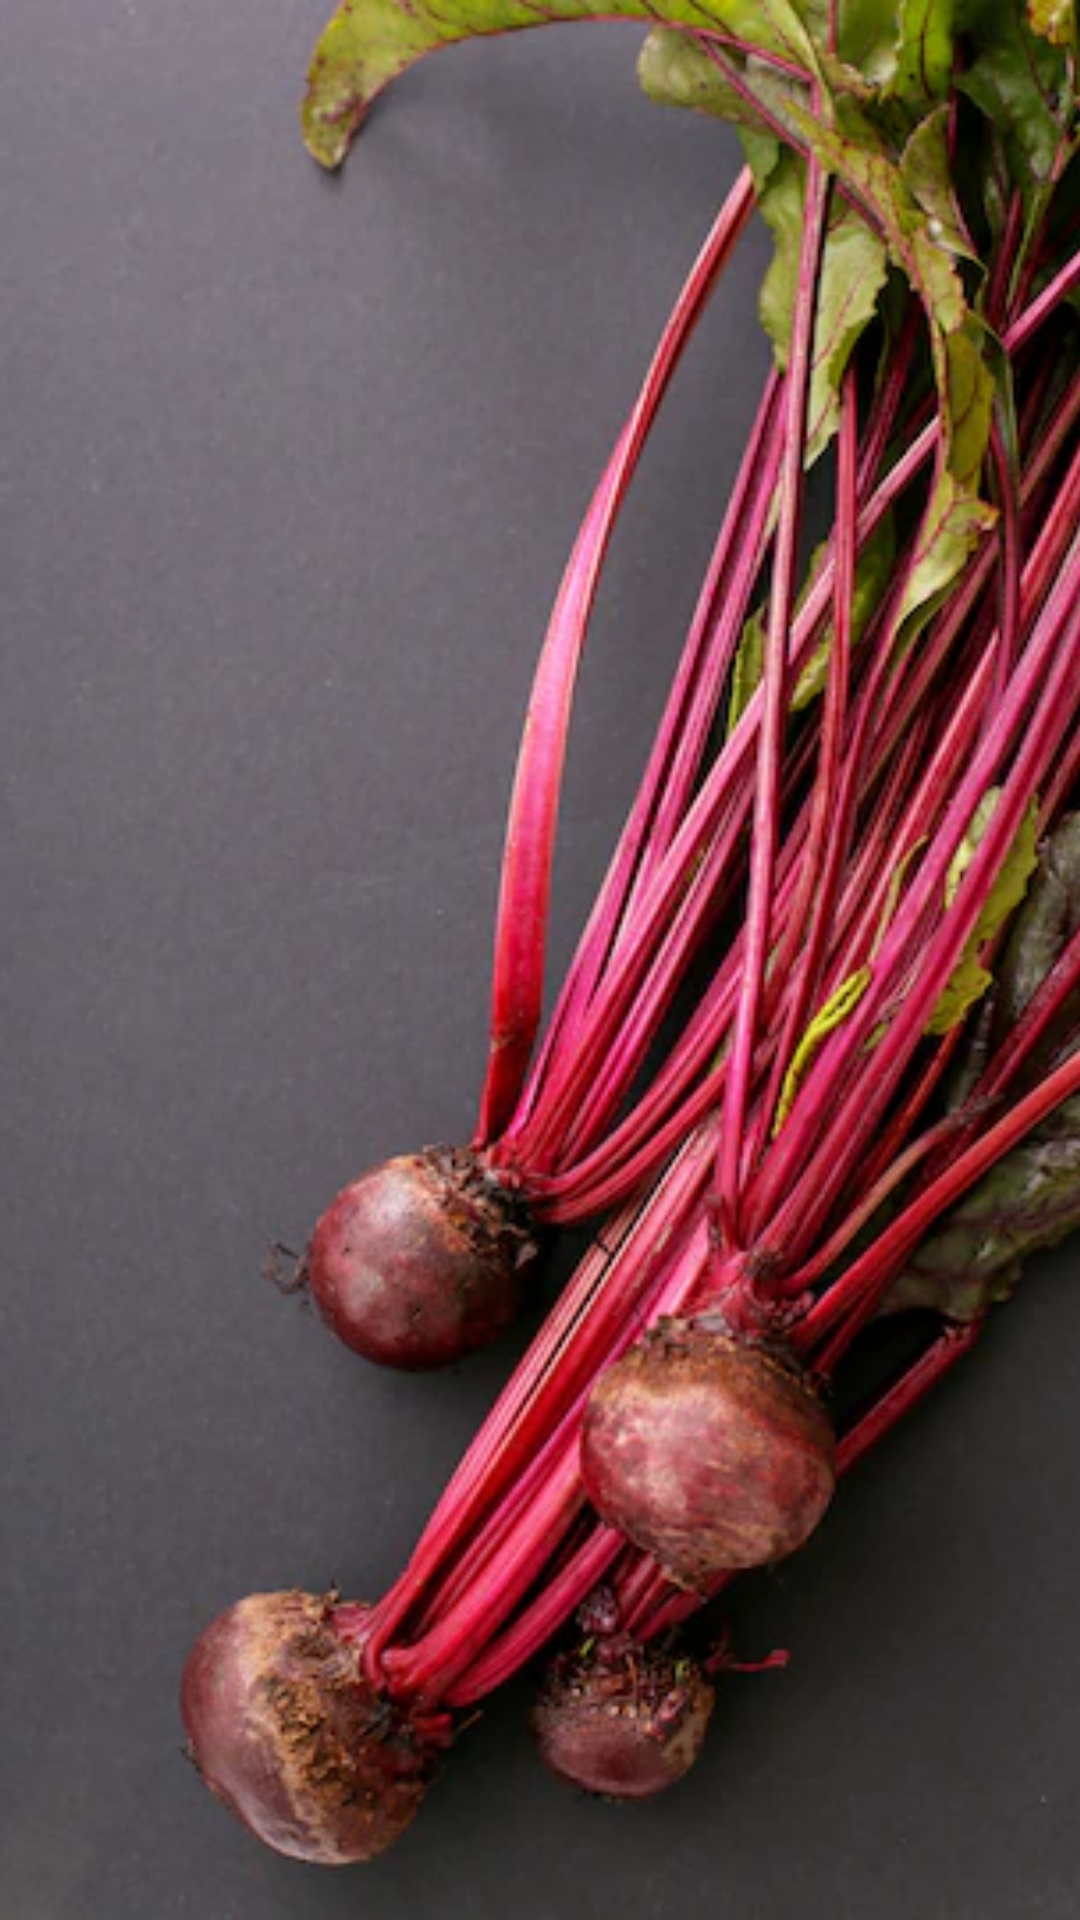 Beetroot has 5 healthy benefits. Know what they are here.